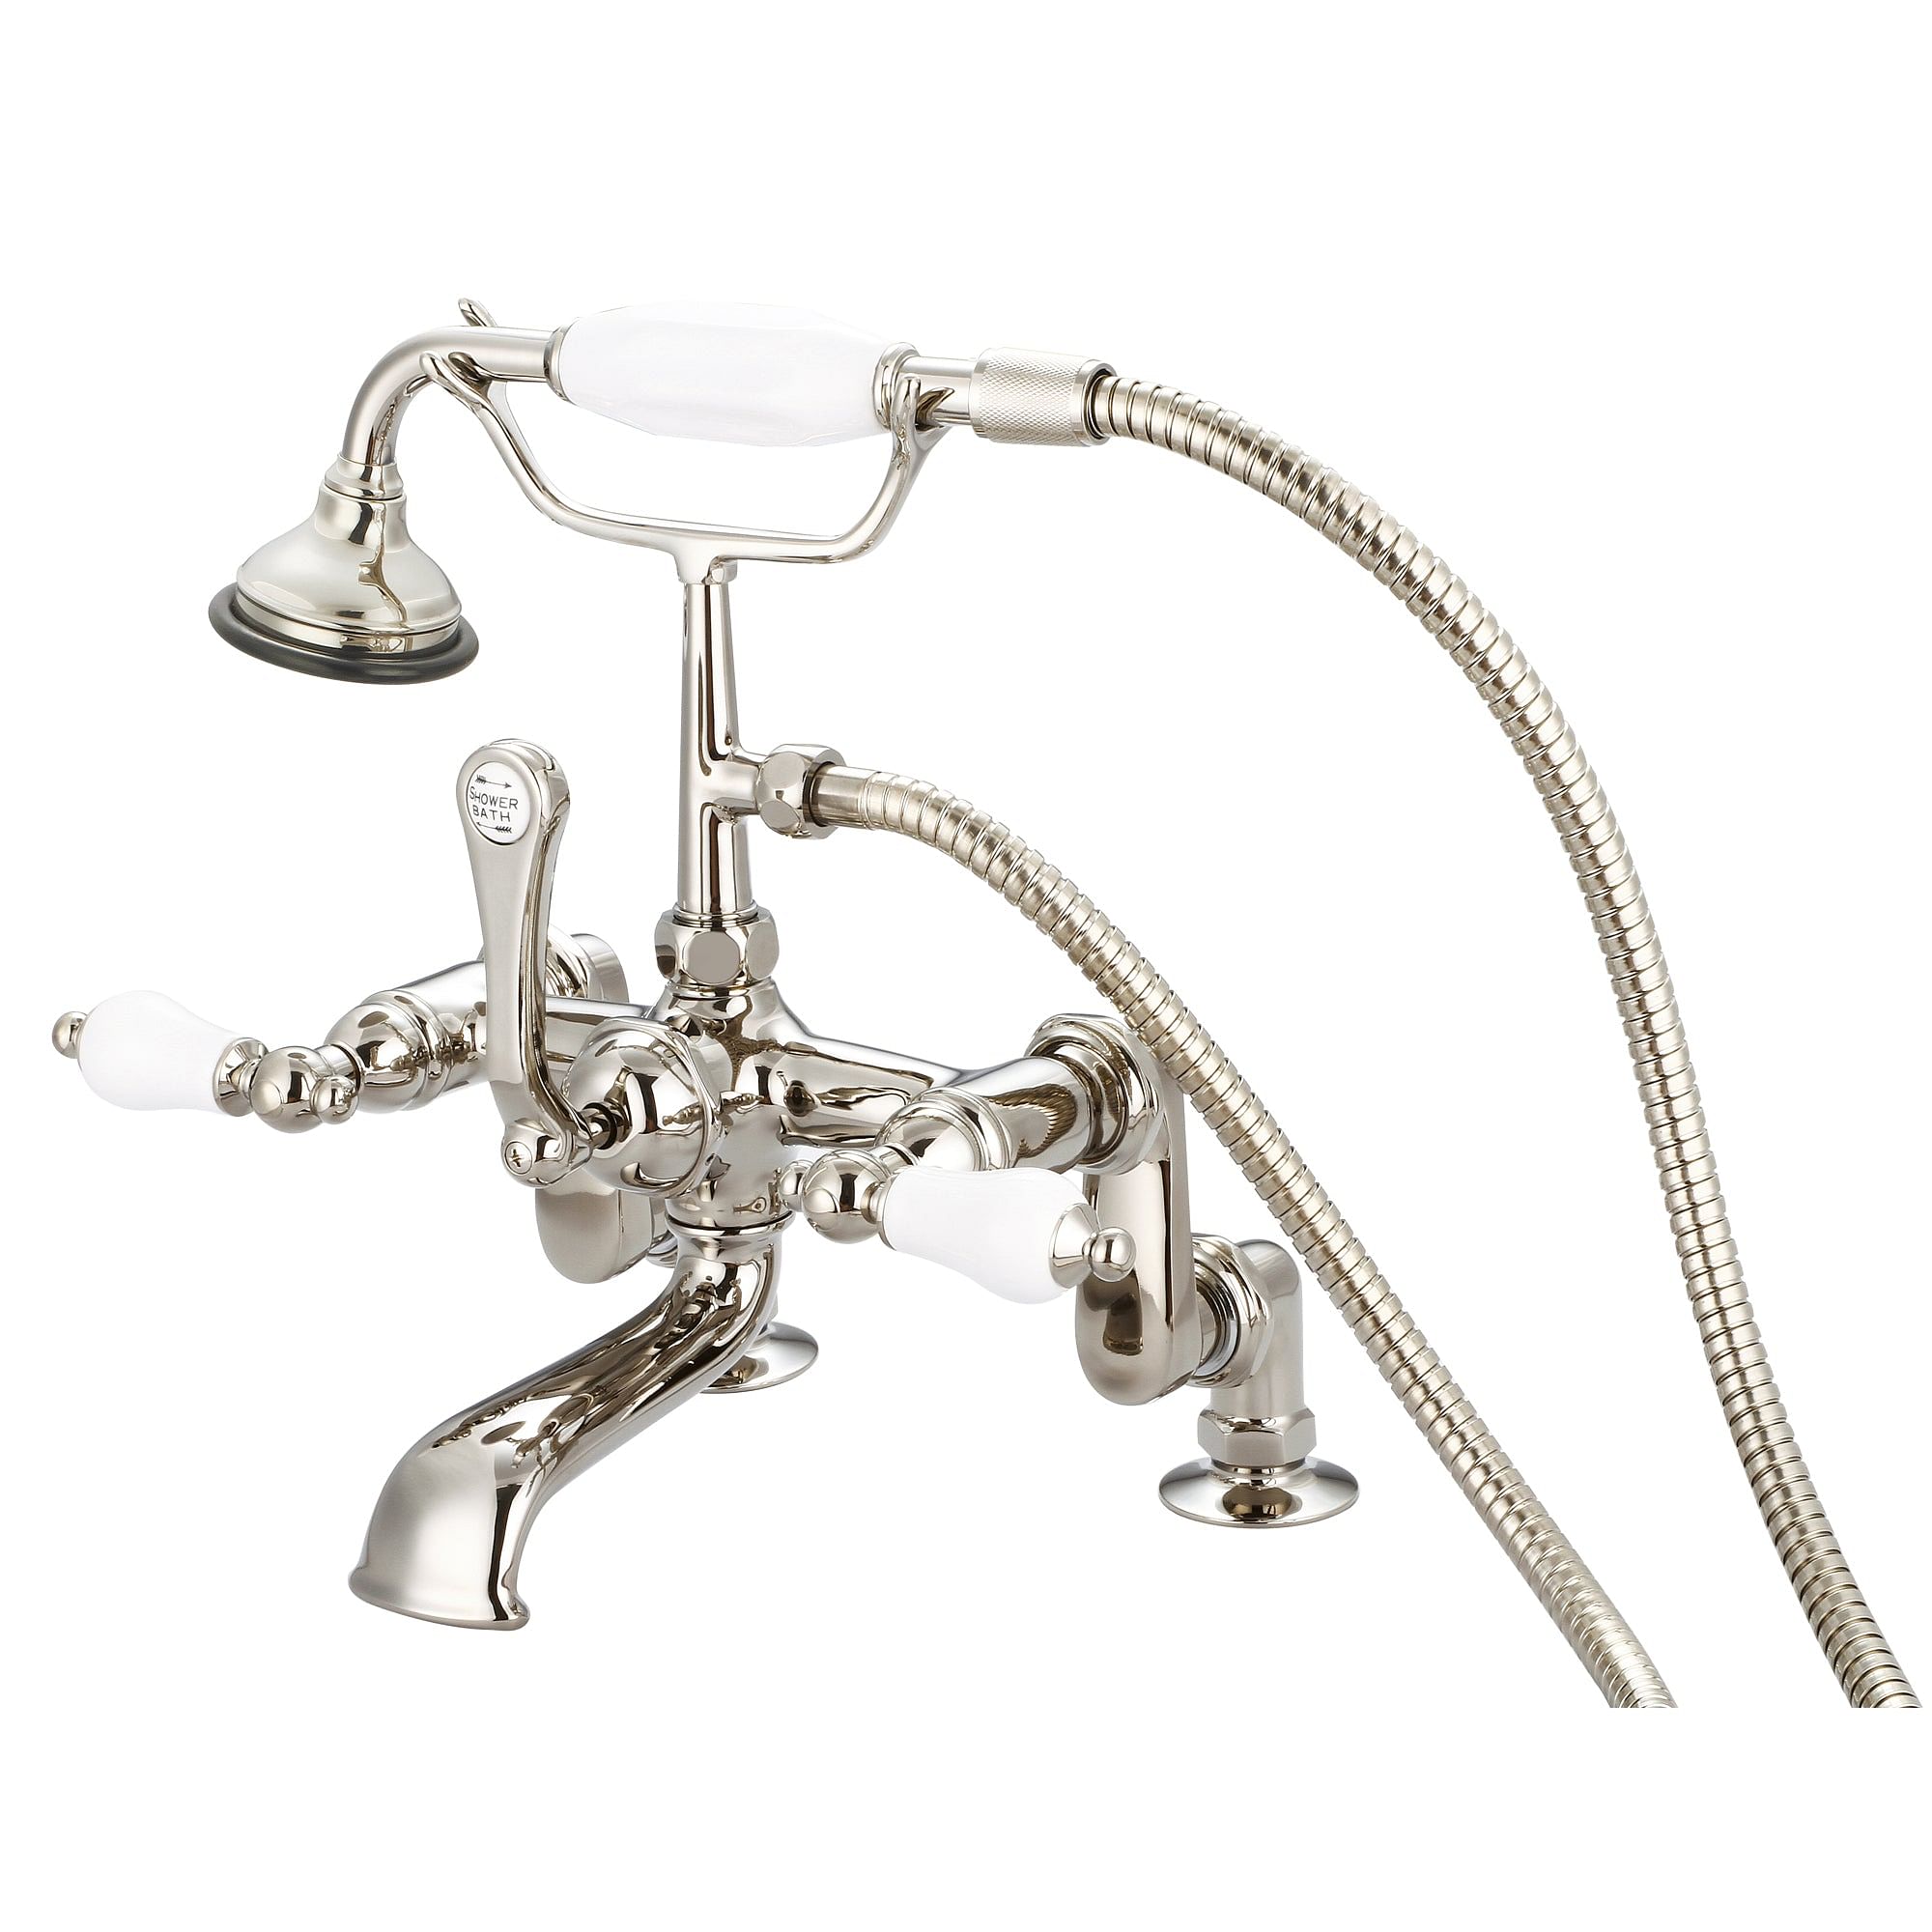 Vintage Classic Adjustable Center Deck Mount Tub Faucet With Handheld Shower in Polished Nickel (PVD) Finish With Porcelain Lever Handles Without labels